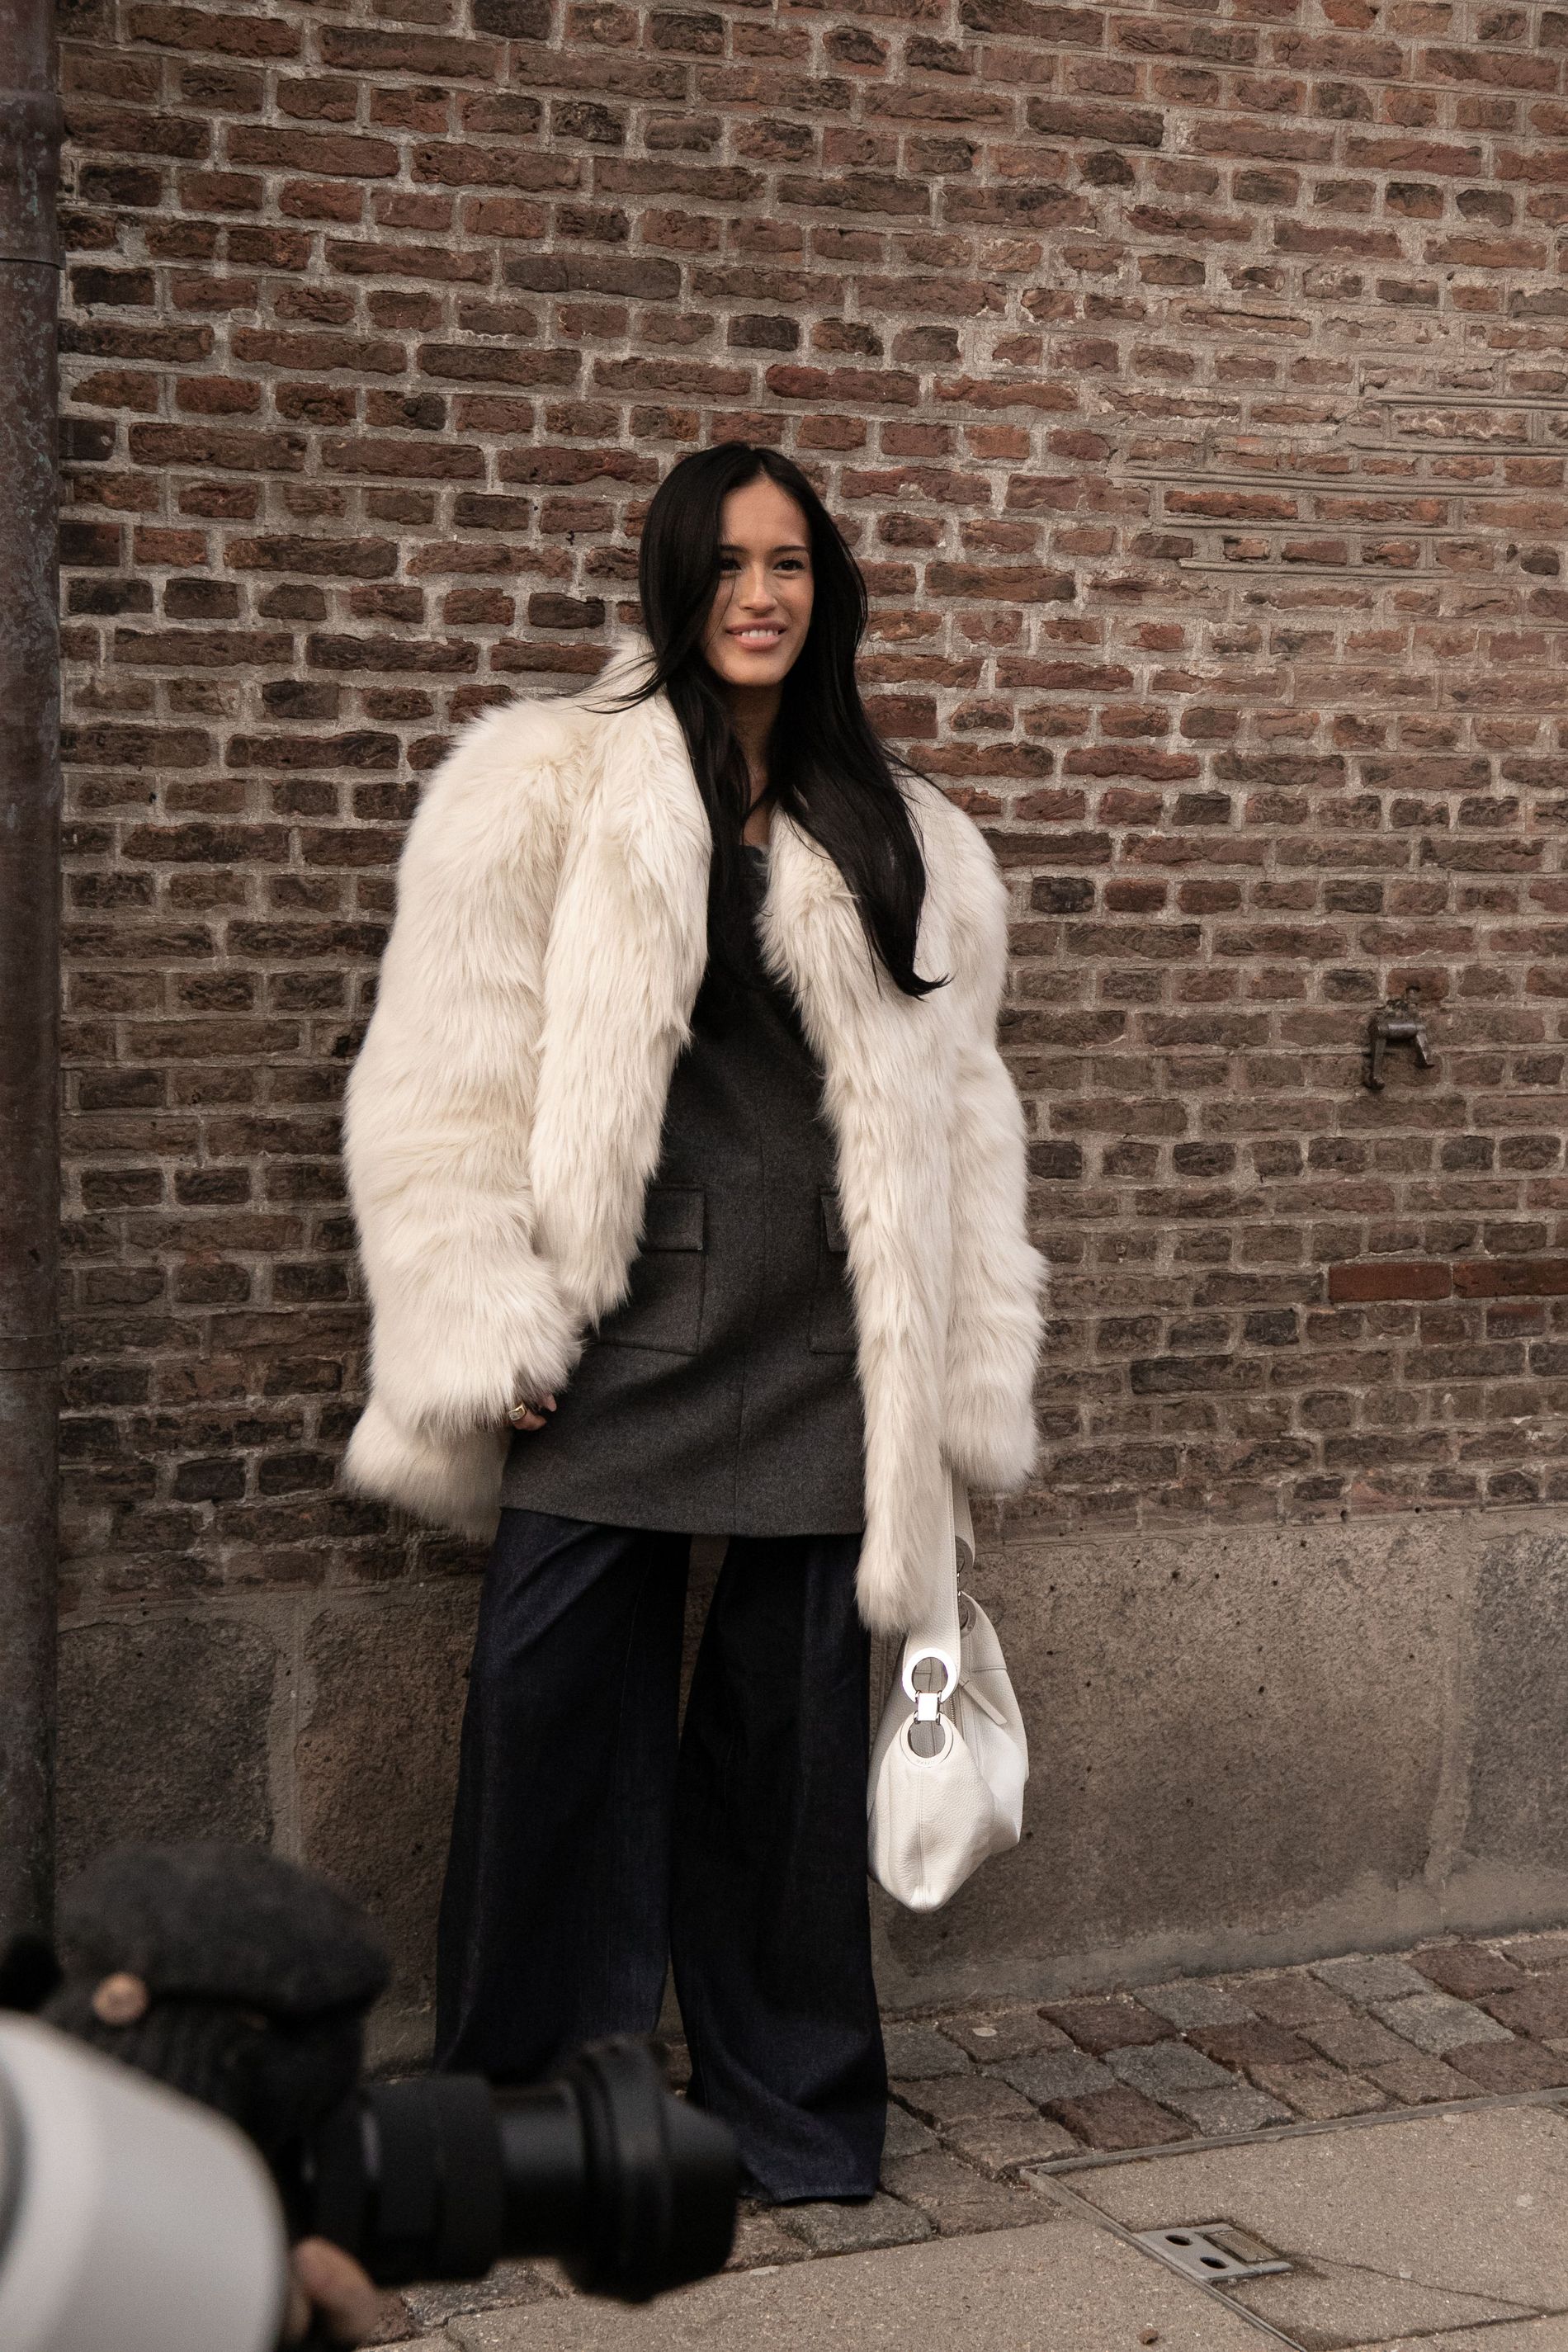 A CPHFW guest wears a white faux fur jacket with a grey dress and wide trousers while posing for street style